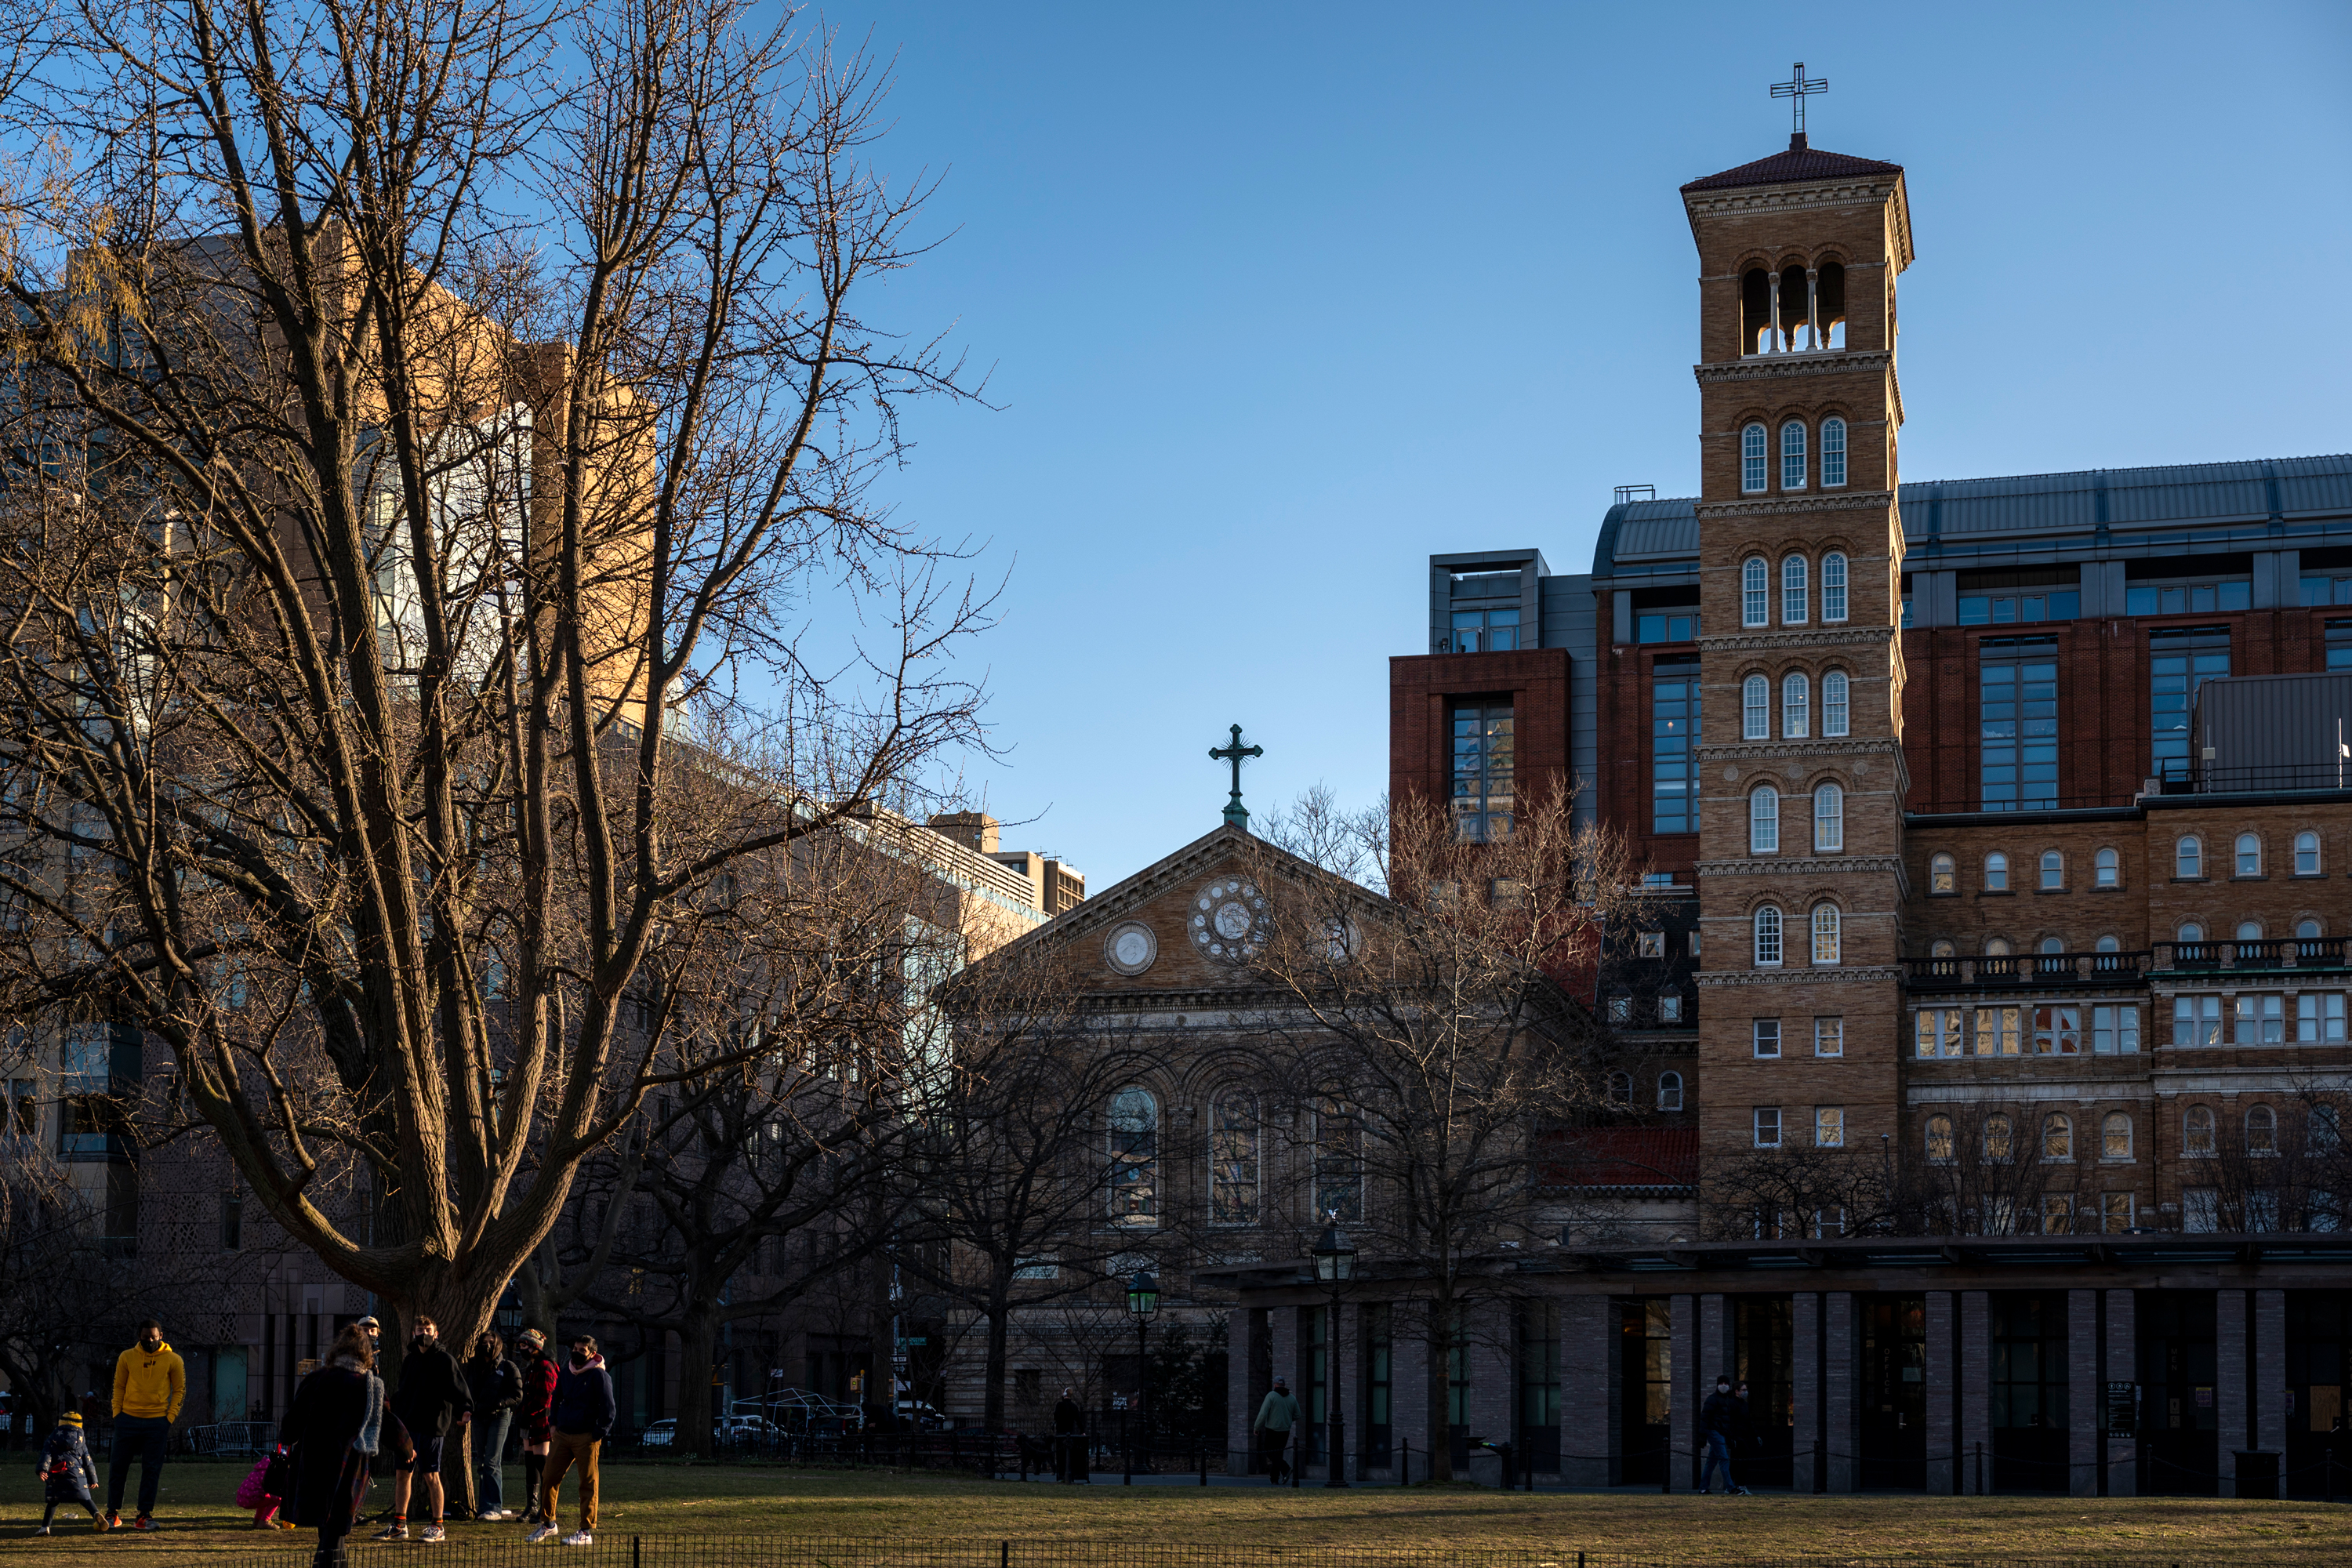 The historic Judson Memorial Church sits on prime real estate overlooking Washington Square Park, March 19, 2021.